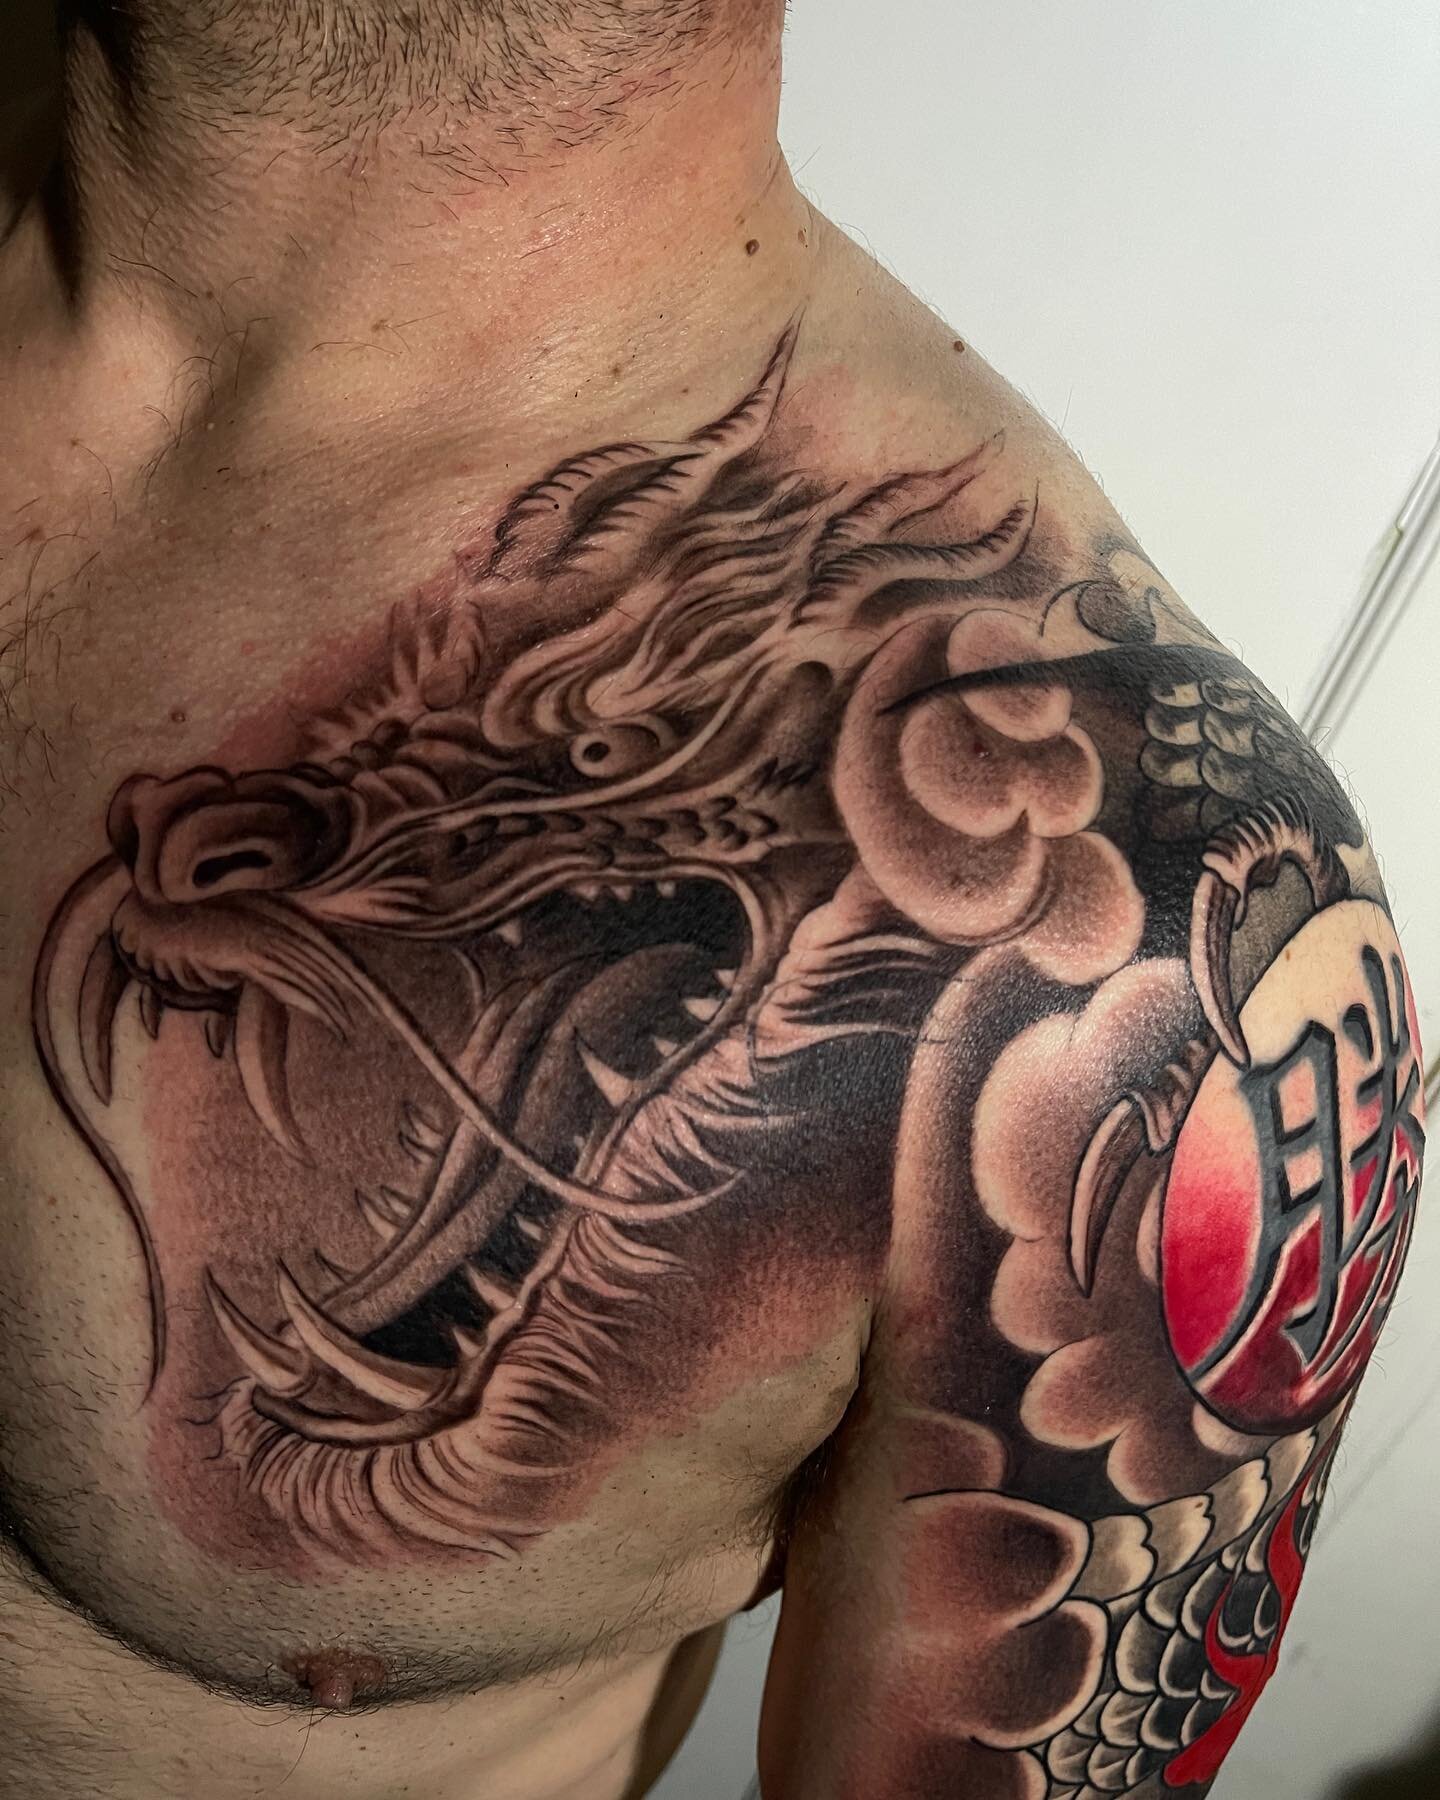 A lil dragon transformation from traditional to realism, hence the backward approach to this design hope you guys enjoy this tattoo